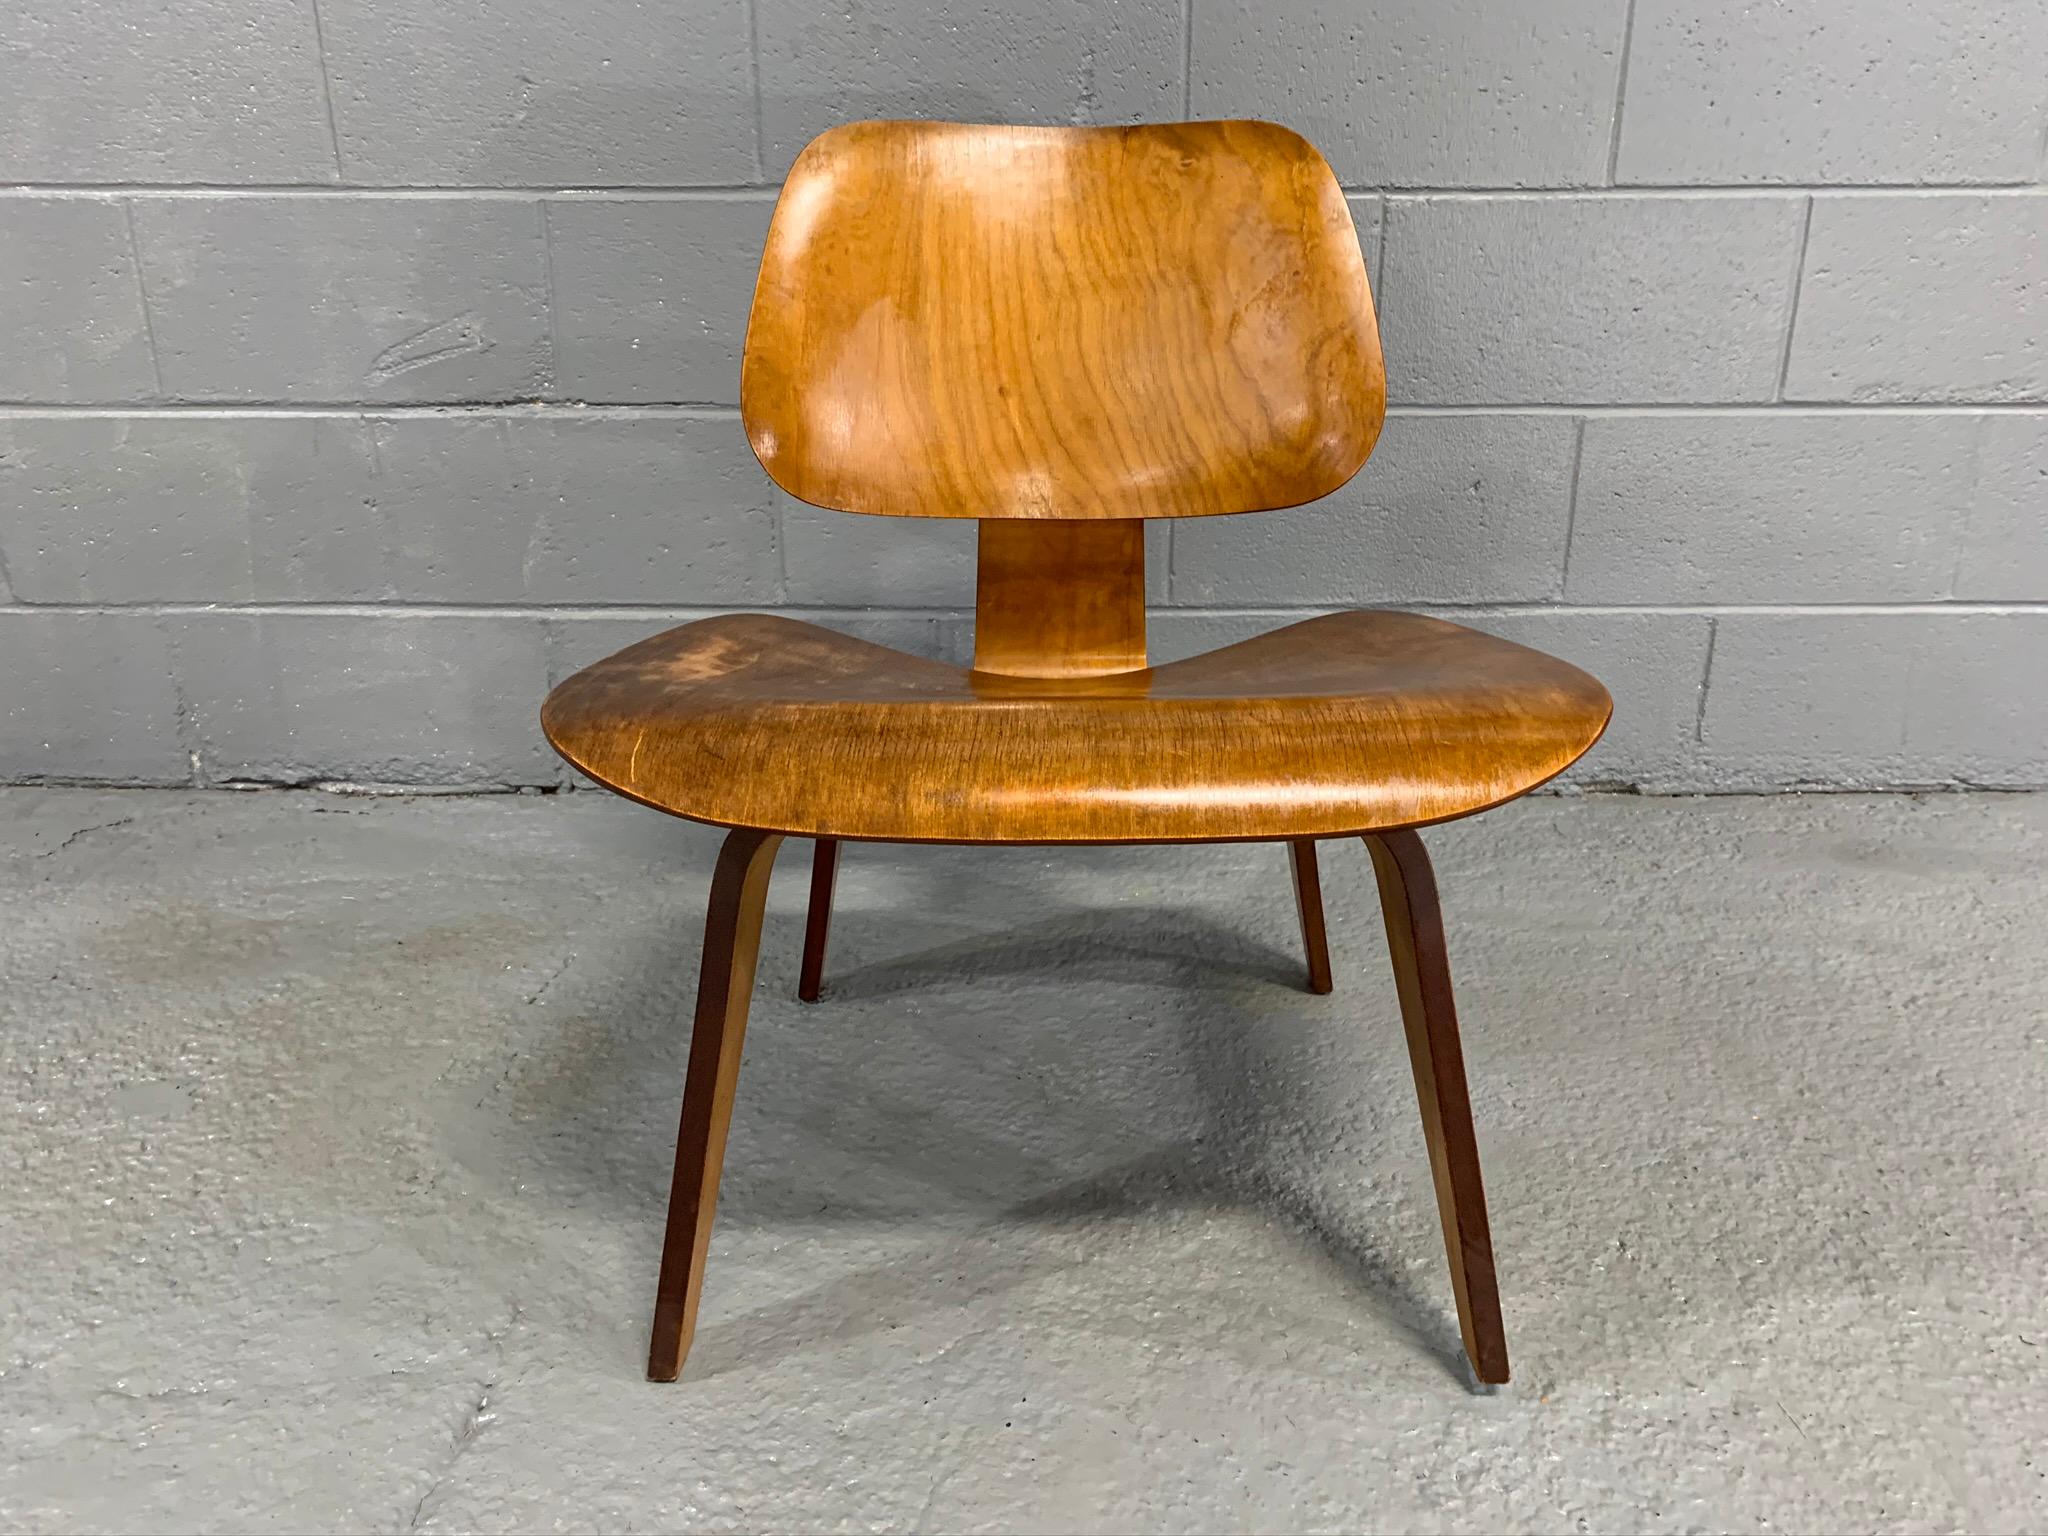 Excellent pre-1957 example of Charles Eames' LCW chair, given the rich wood patina, construction configuration and provenance of this chair. This piece is in maple and was manufactured by Herman Miller. It is structurally sound and its shock mounts